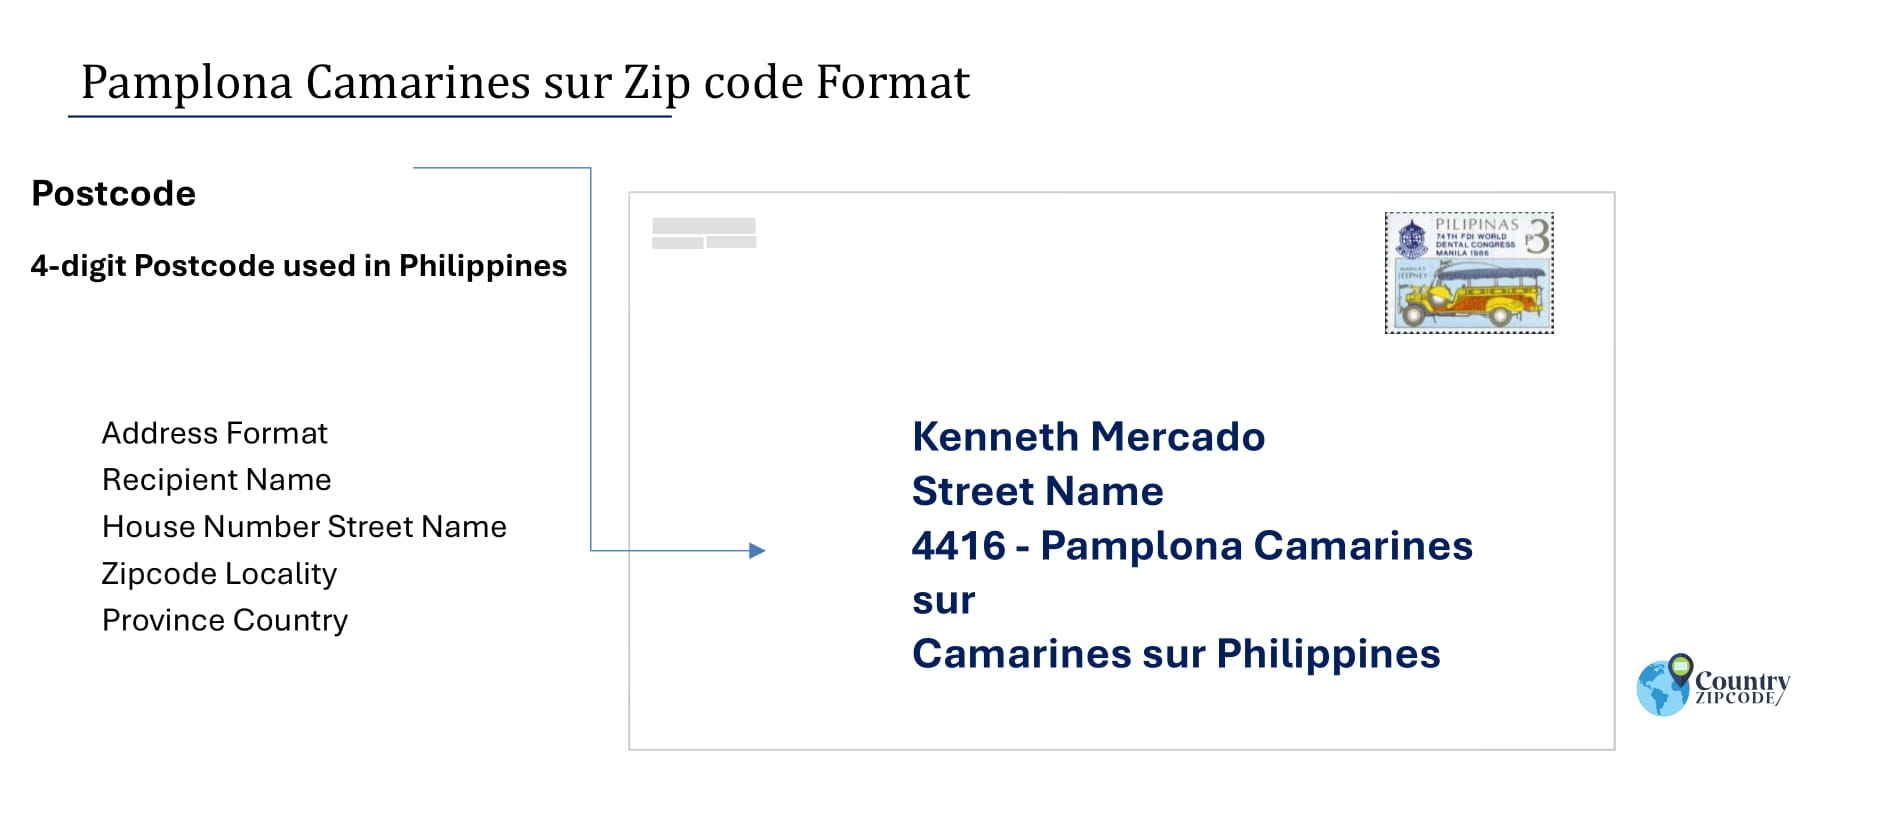 example of Pamplona Camarines sur Philippines zip code and address format